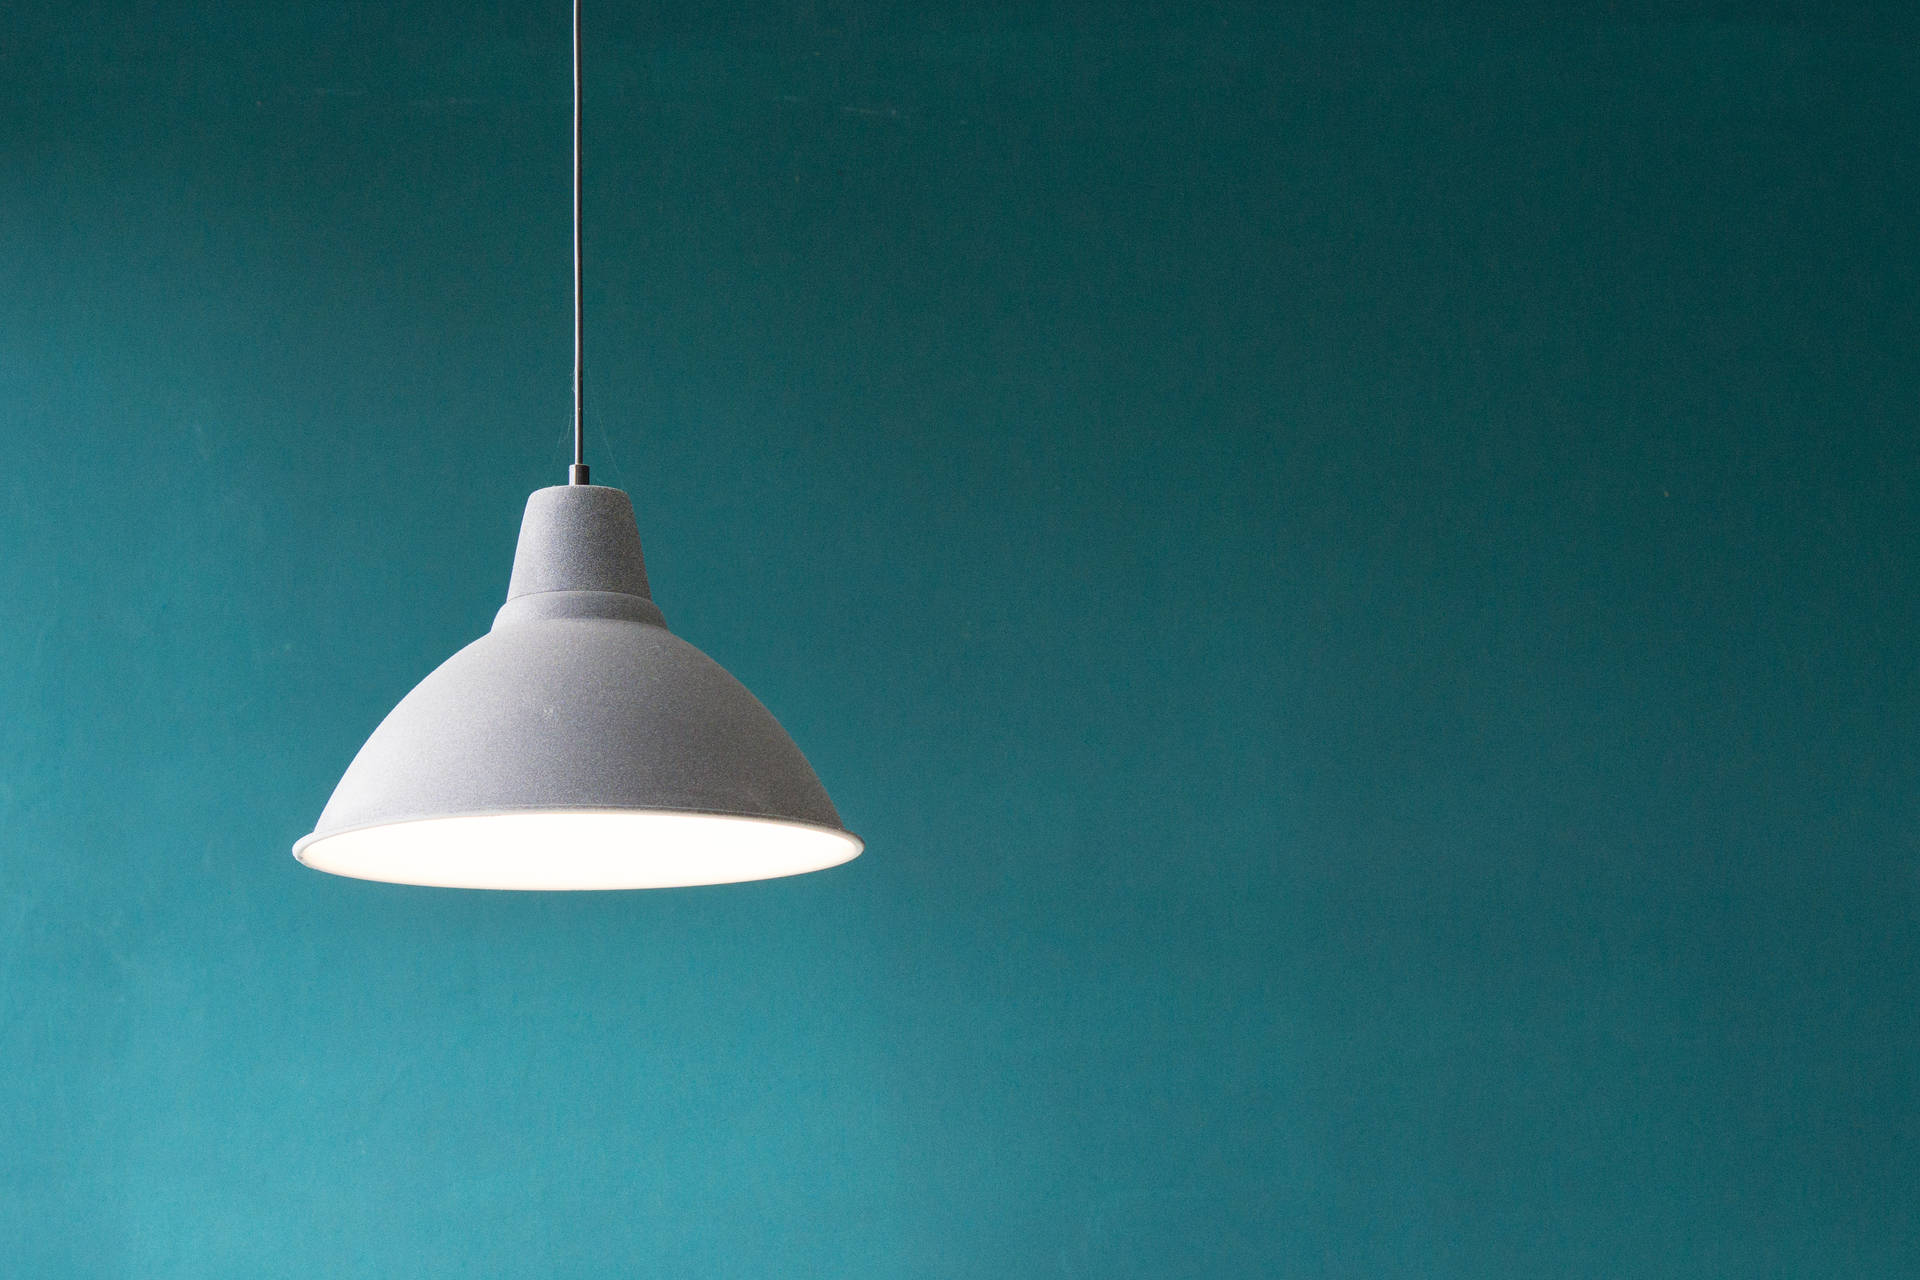 Teal Wall And Lamp Background